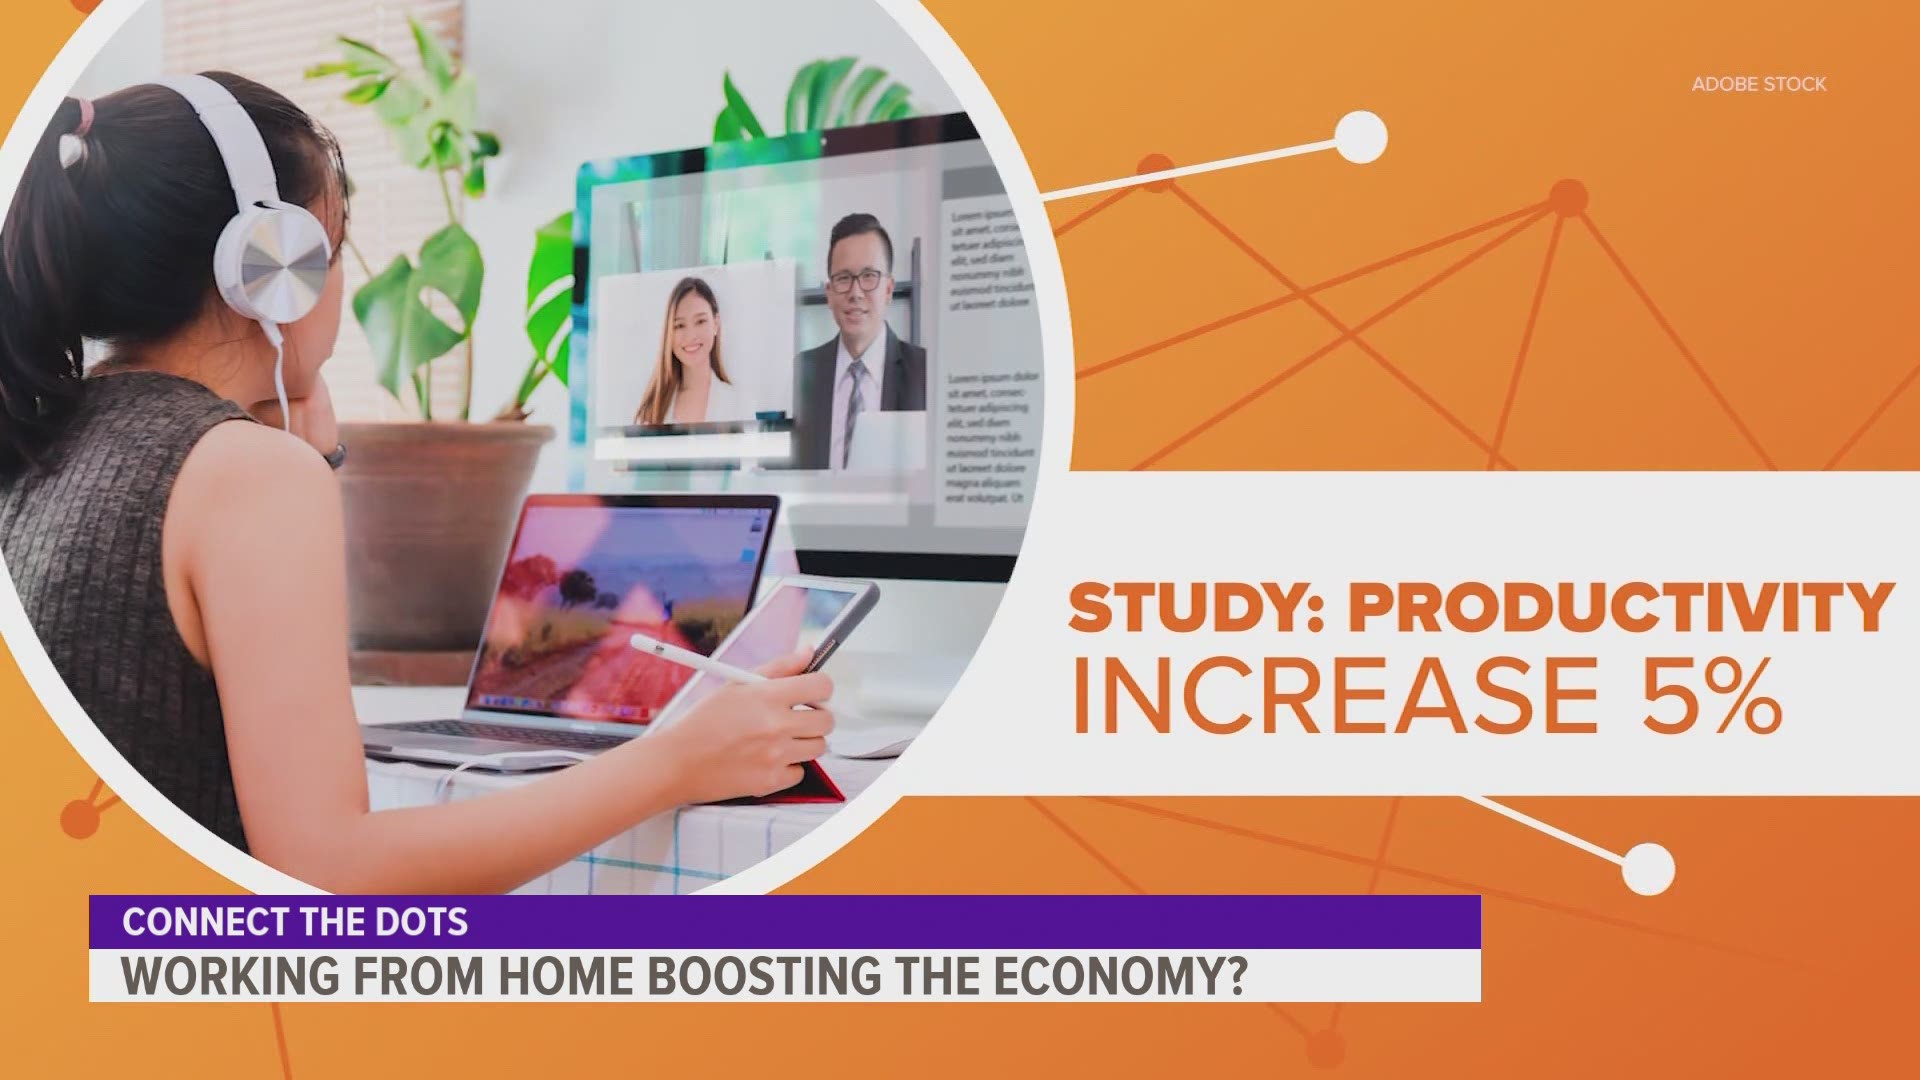 A new Bloomberg study shows that working from home is boosting the U.S. economy and employee productivity.